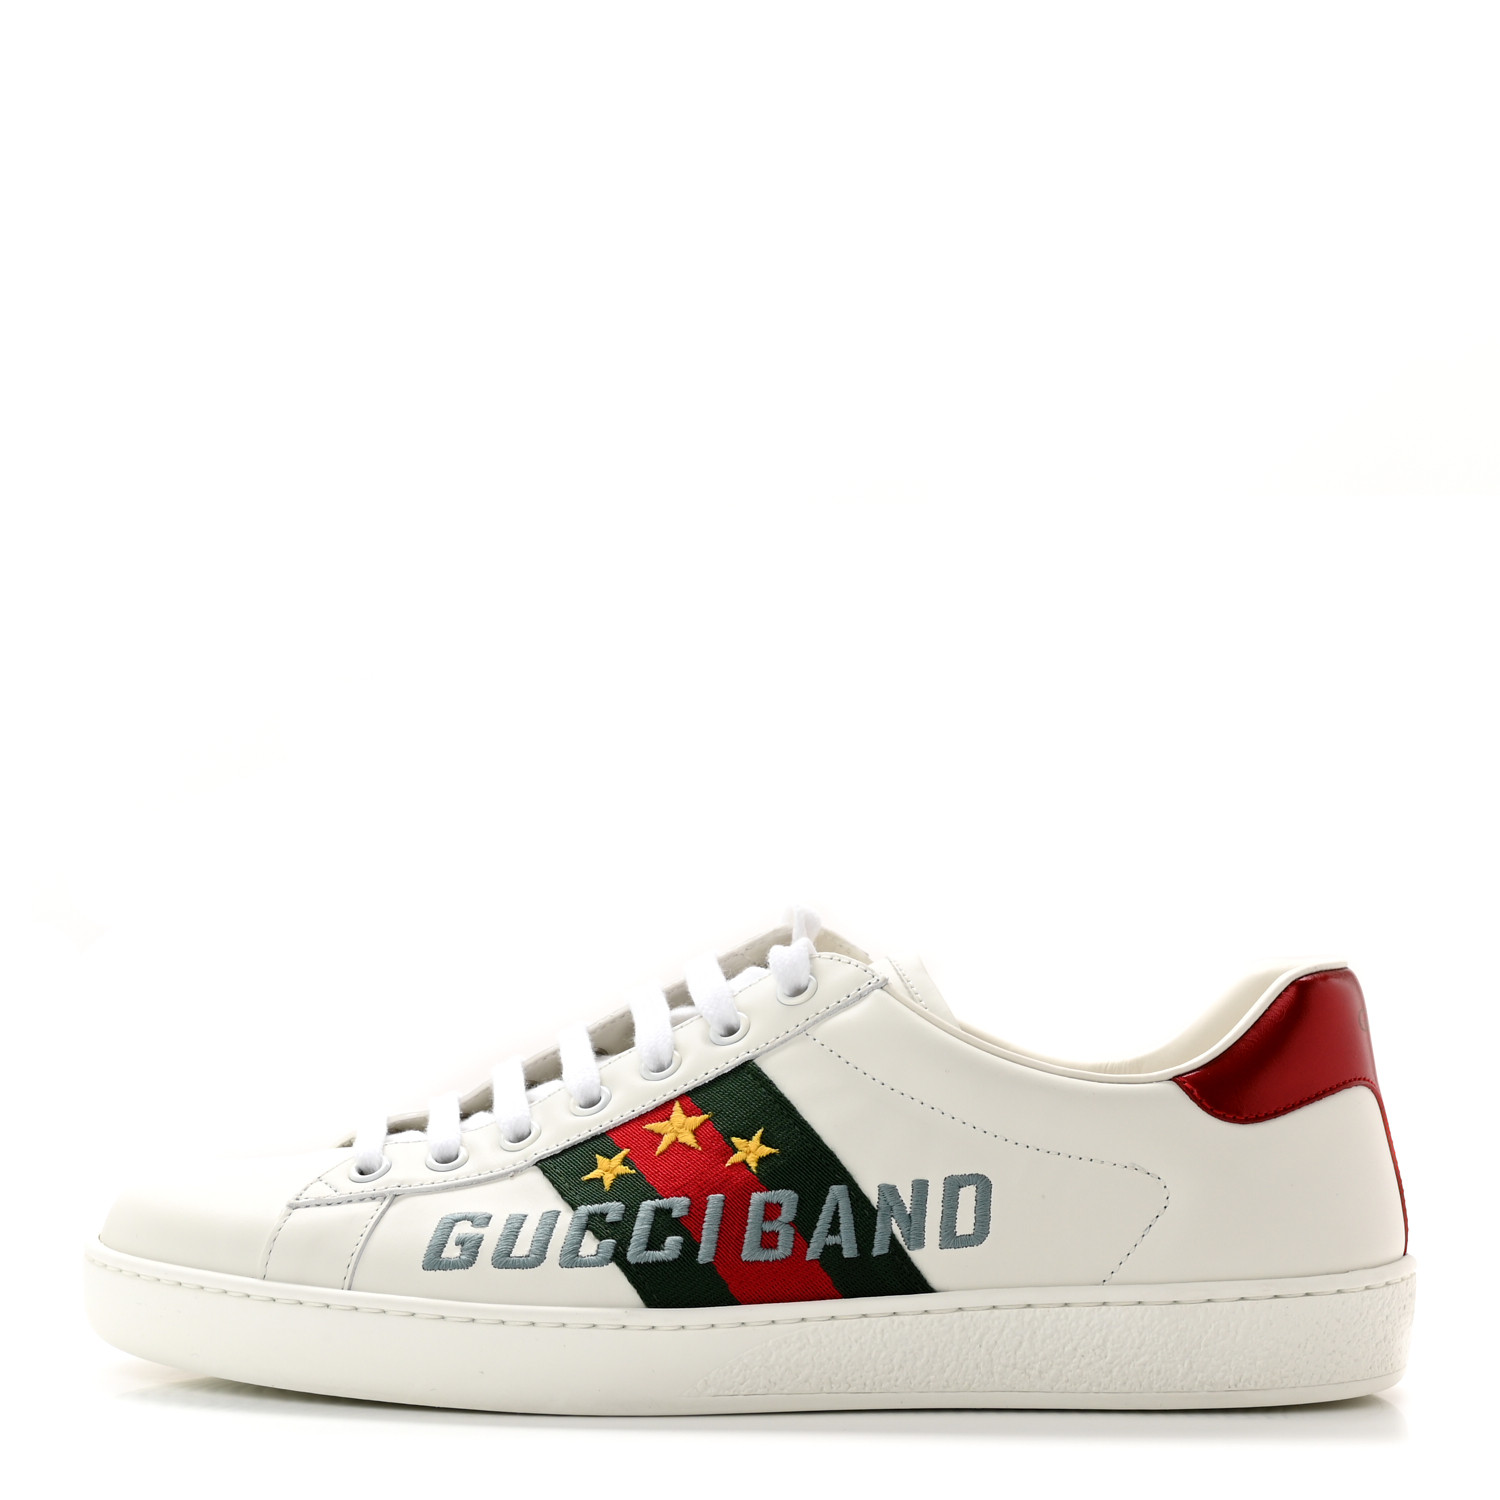 GUCCI Calfskin Web Mens Gucci Band Ace Sneakers 8 White